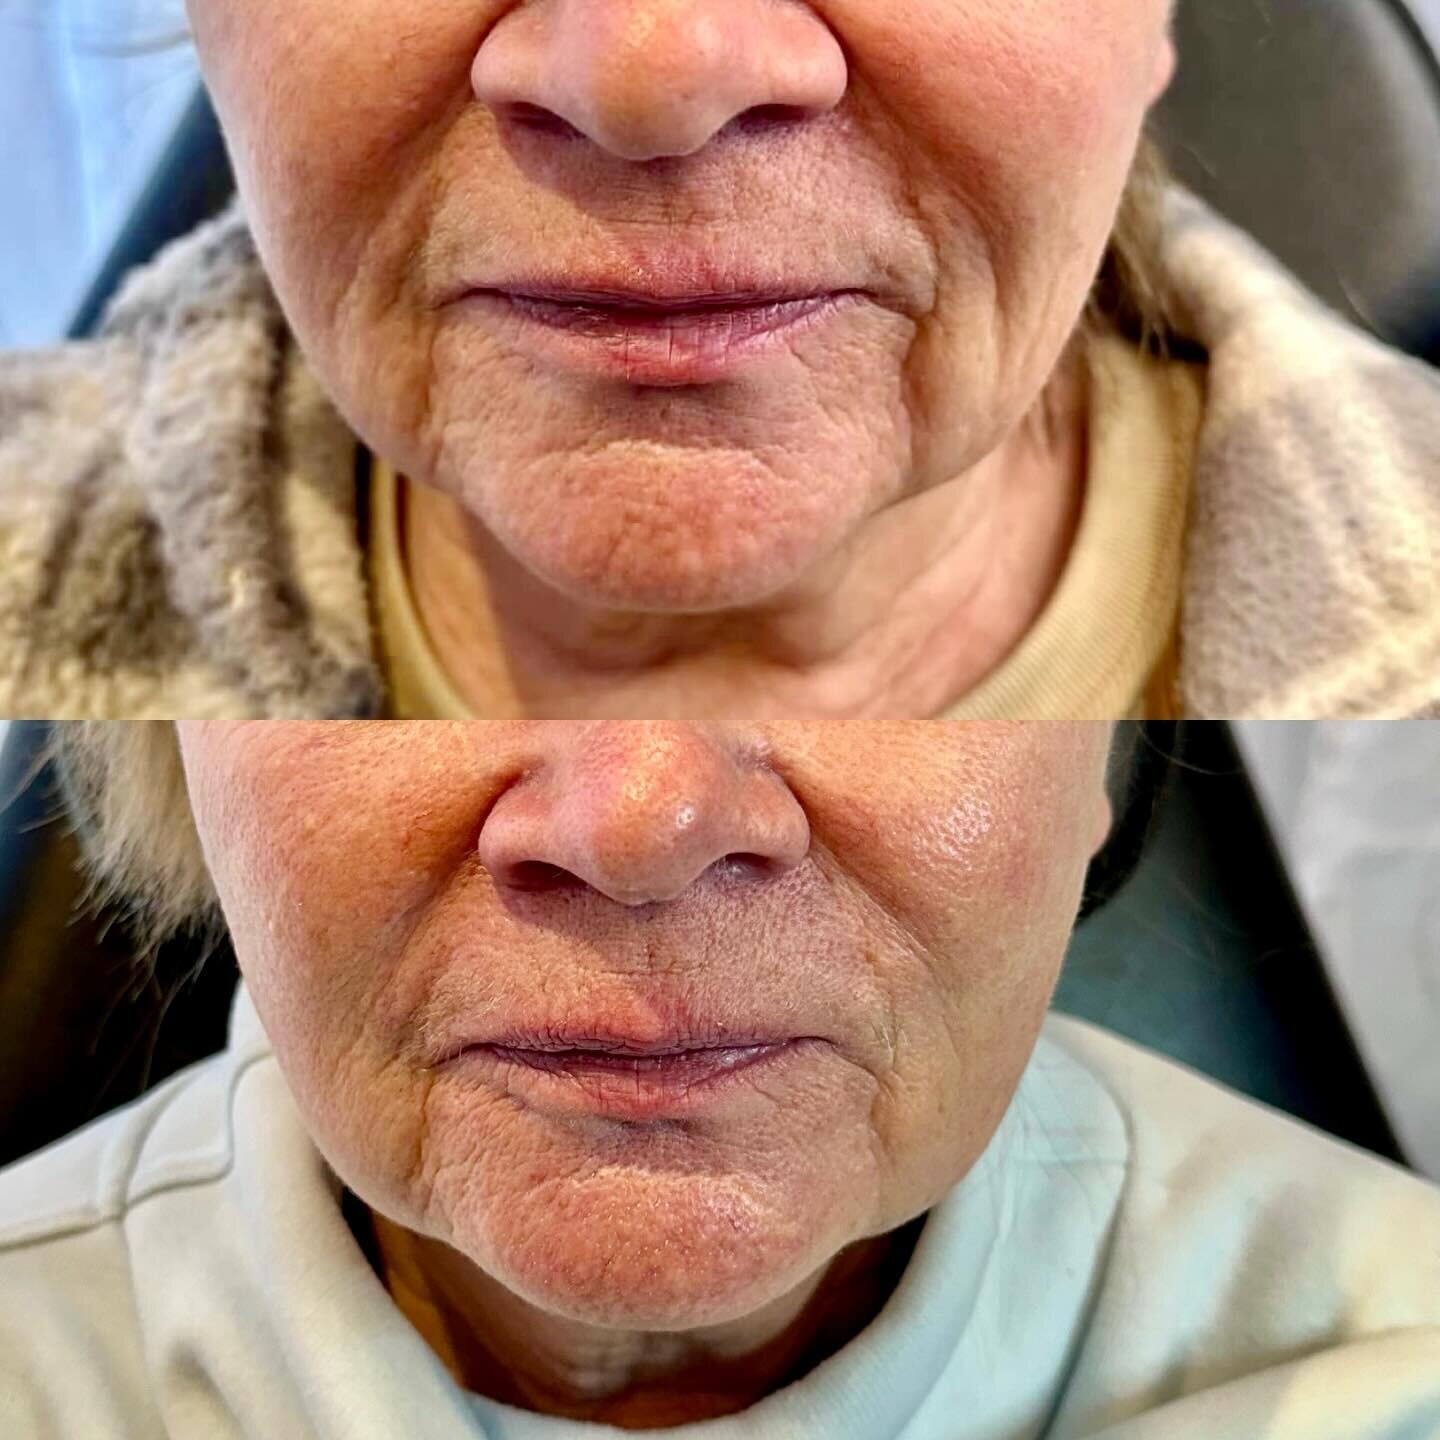 2 Sculptra treatments completed and already showing amazing results.  One final treatment to go 

Sculptra is a bio-stimulating filler that triggers, a process of collagen production, helping to restore lost volume and giving an overall more youthful